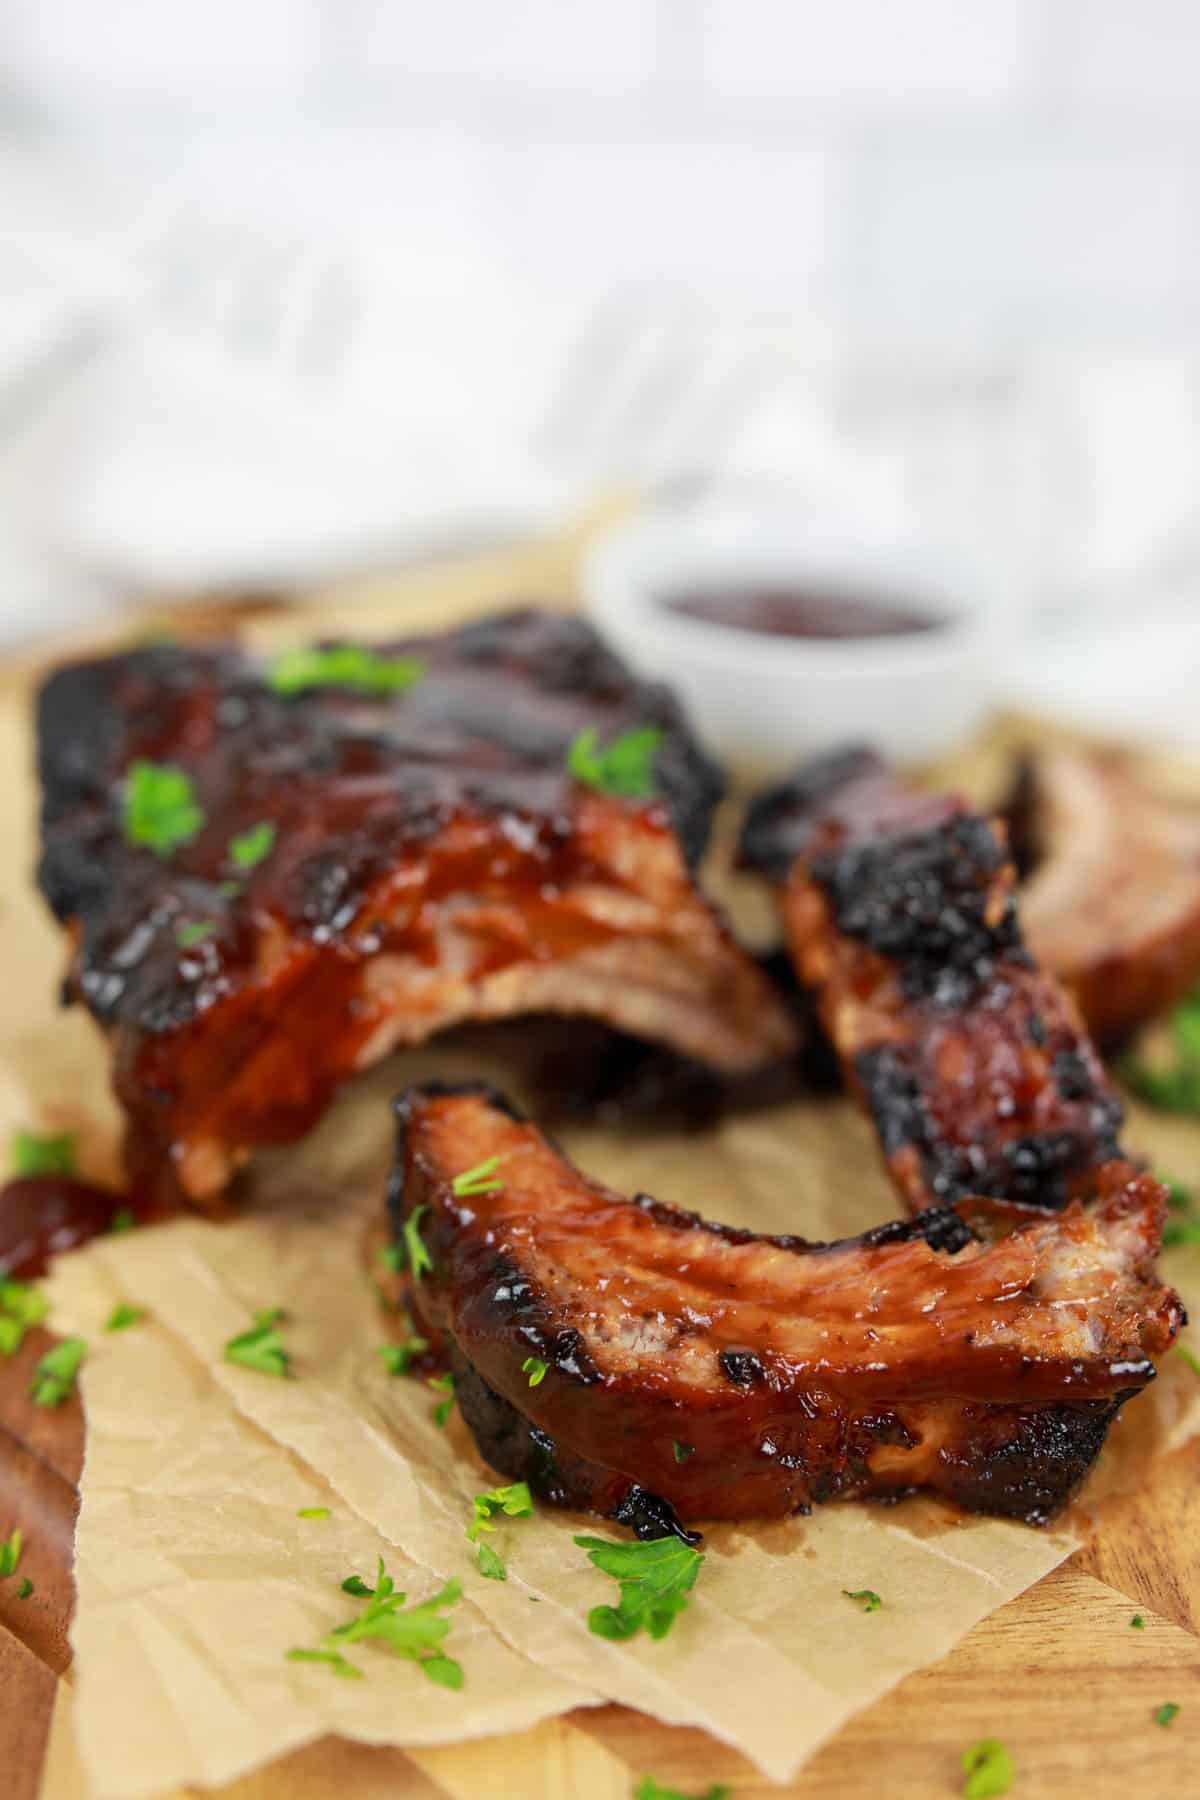 Air Fryer BBQ Ribs are incredibly juicy, flavorful, and simple to make. Tender meat with caramelized barbecue sauce makes cooking ribs in an air fryer a family favorite!